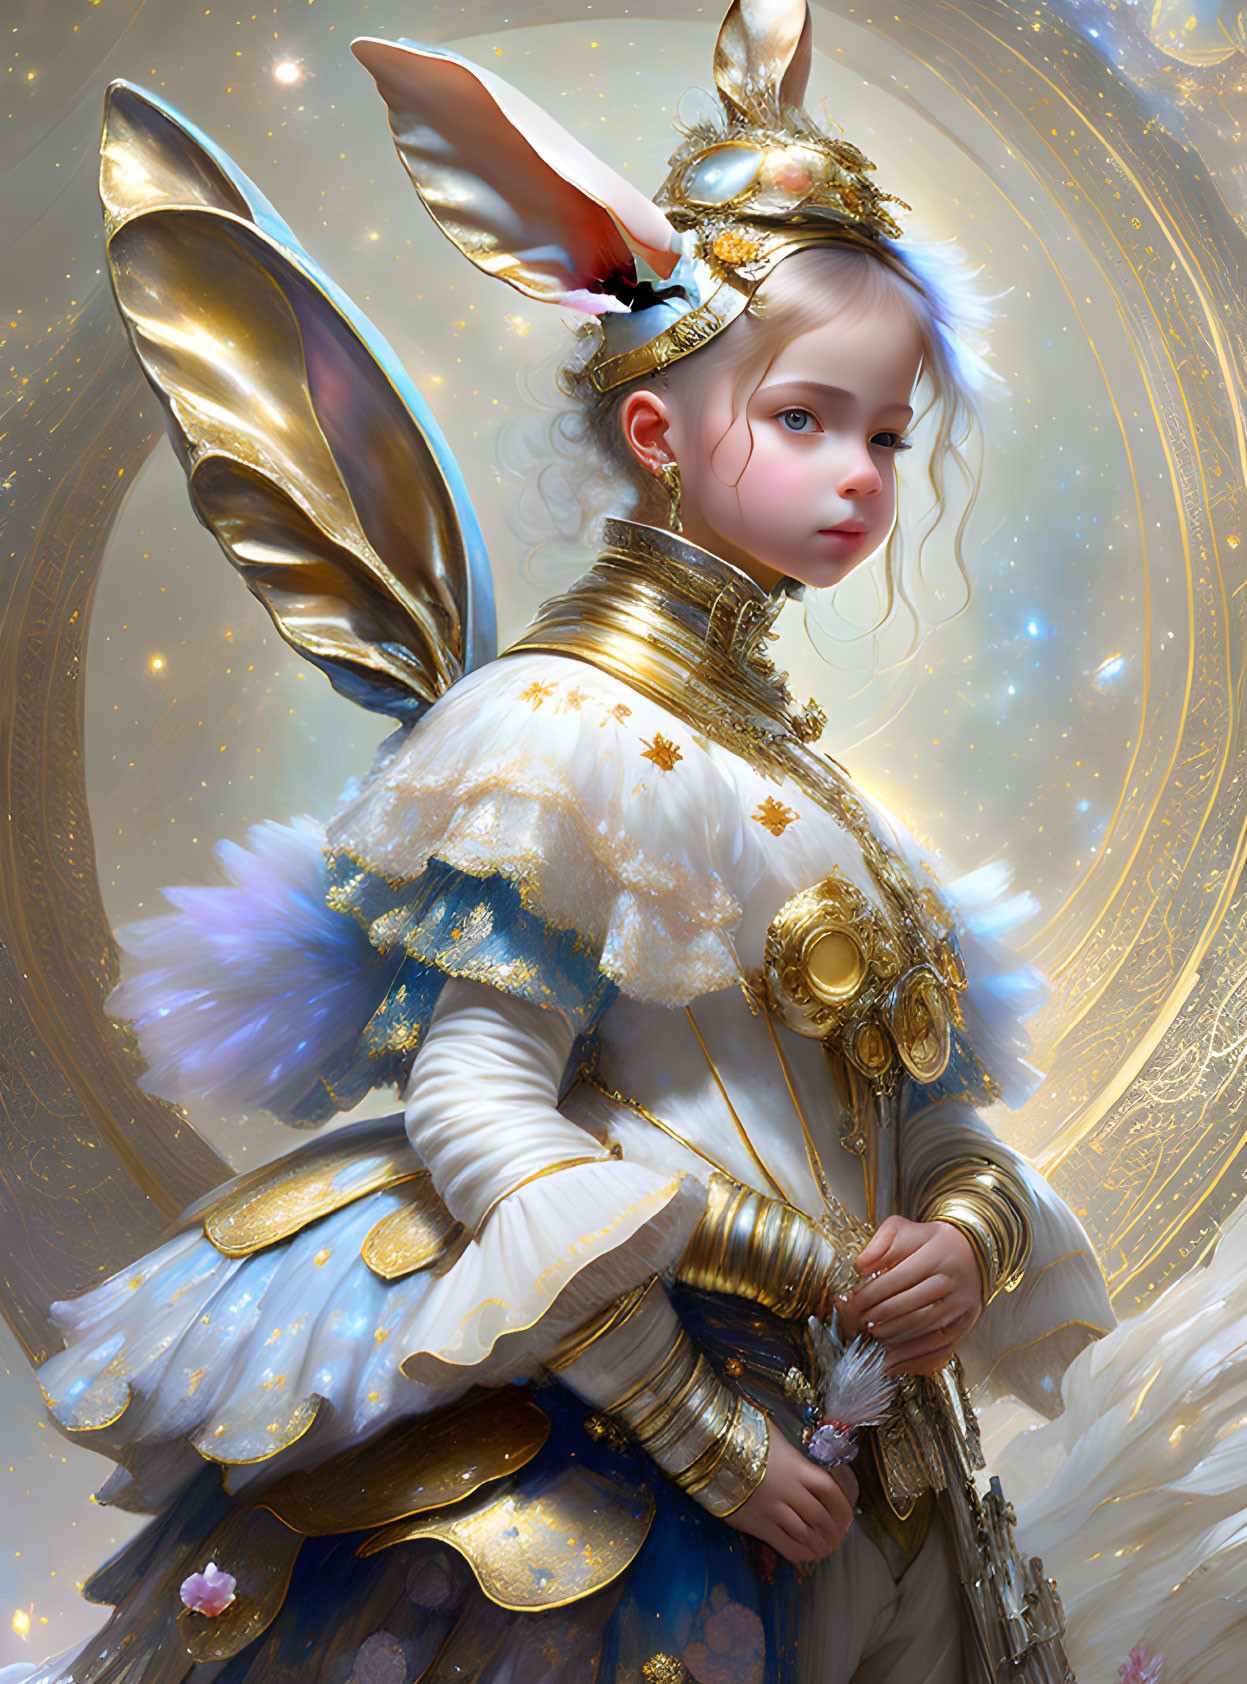 Fantastical portrait of child with bunny ears in ornate gold costume